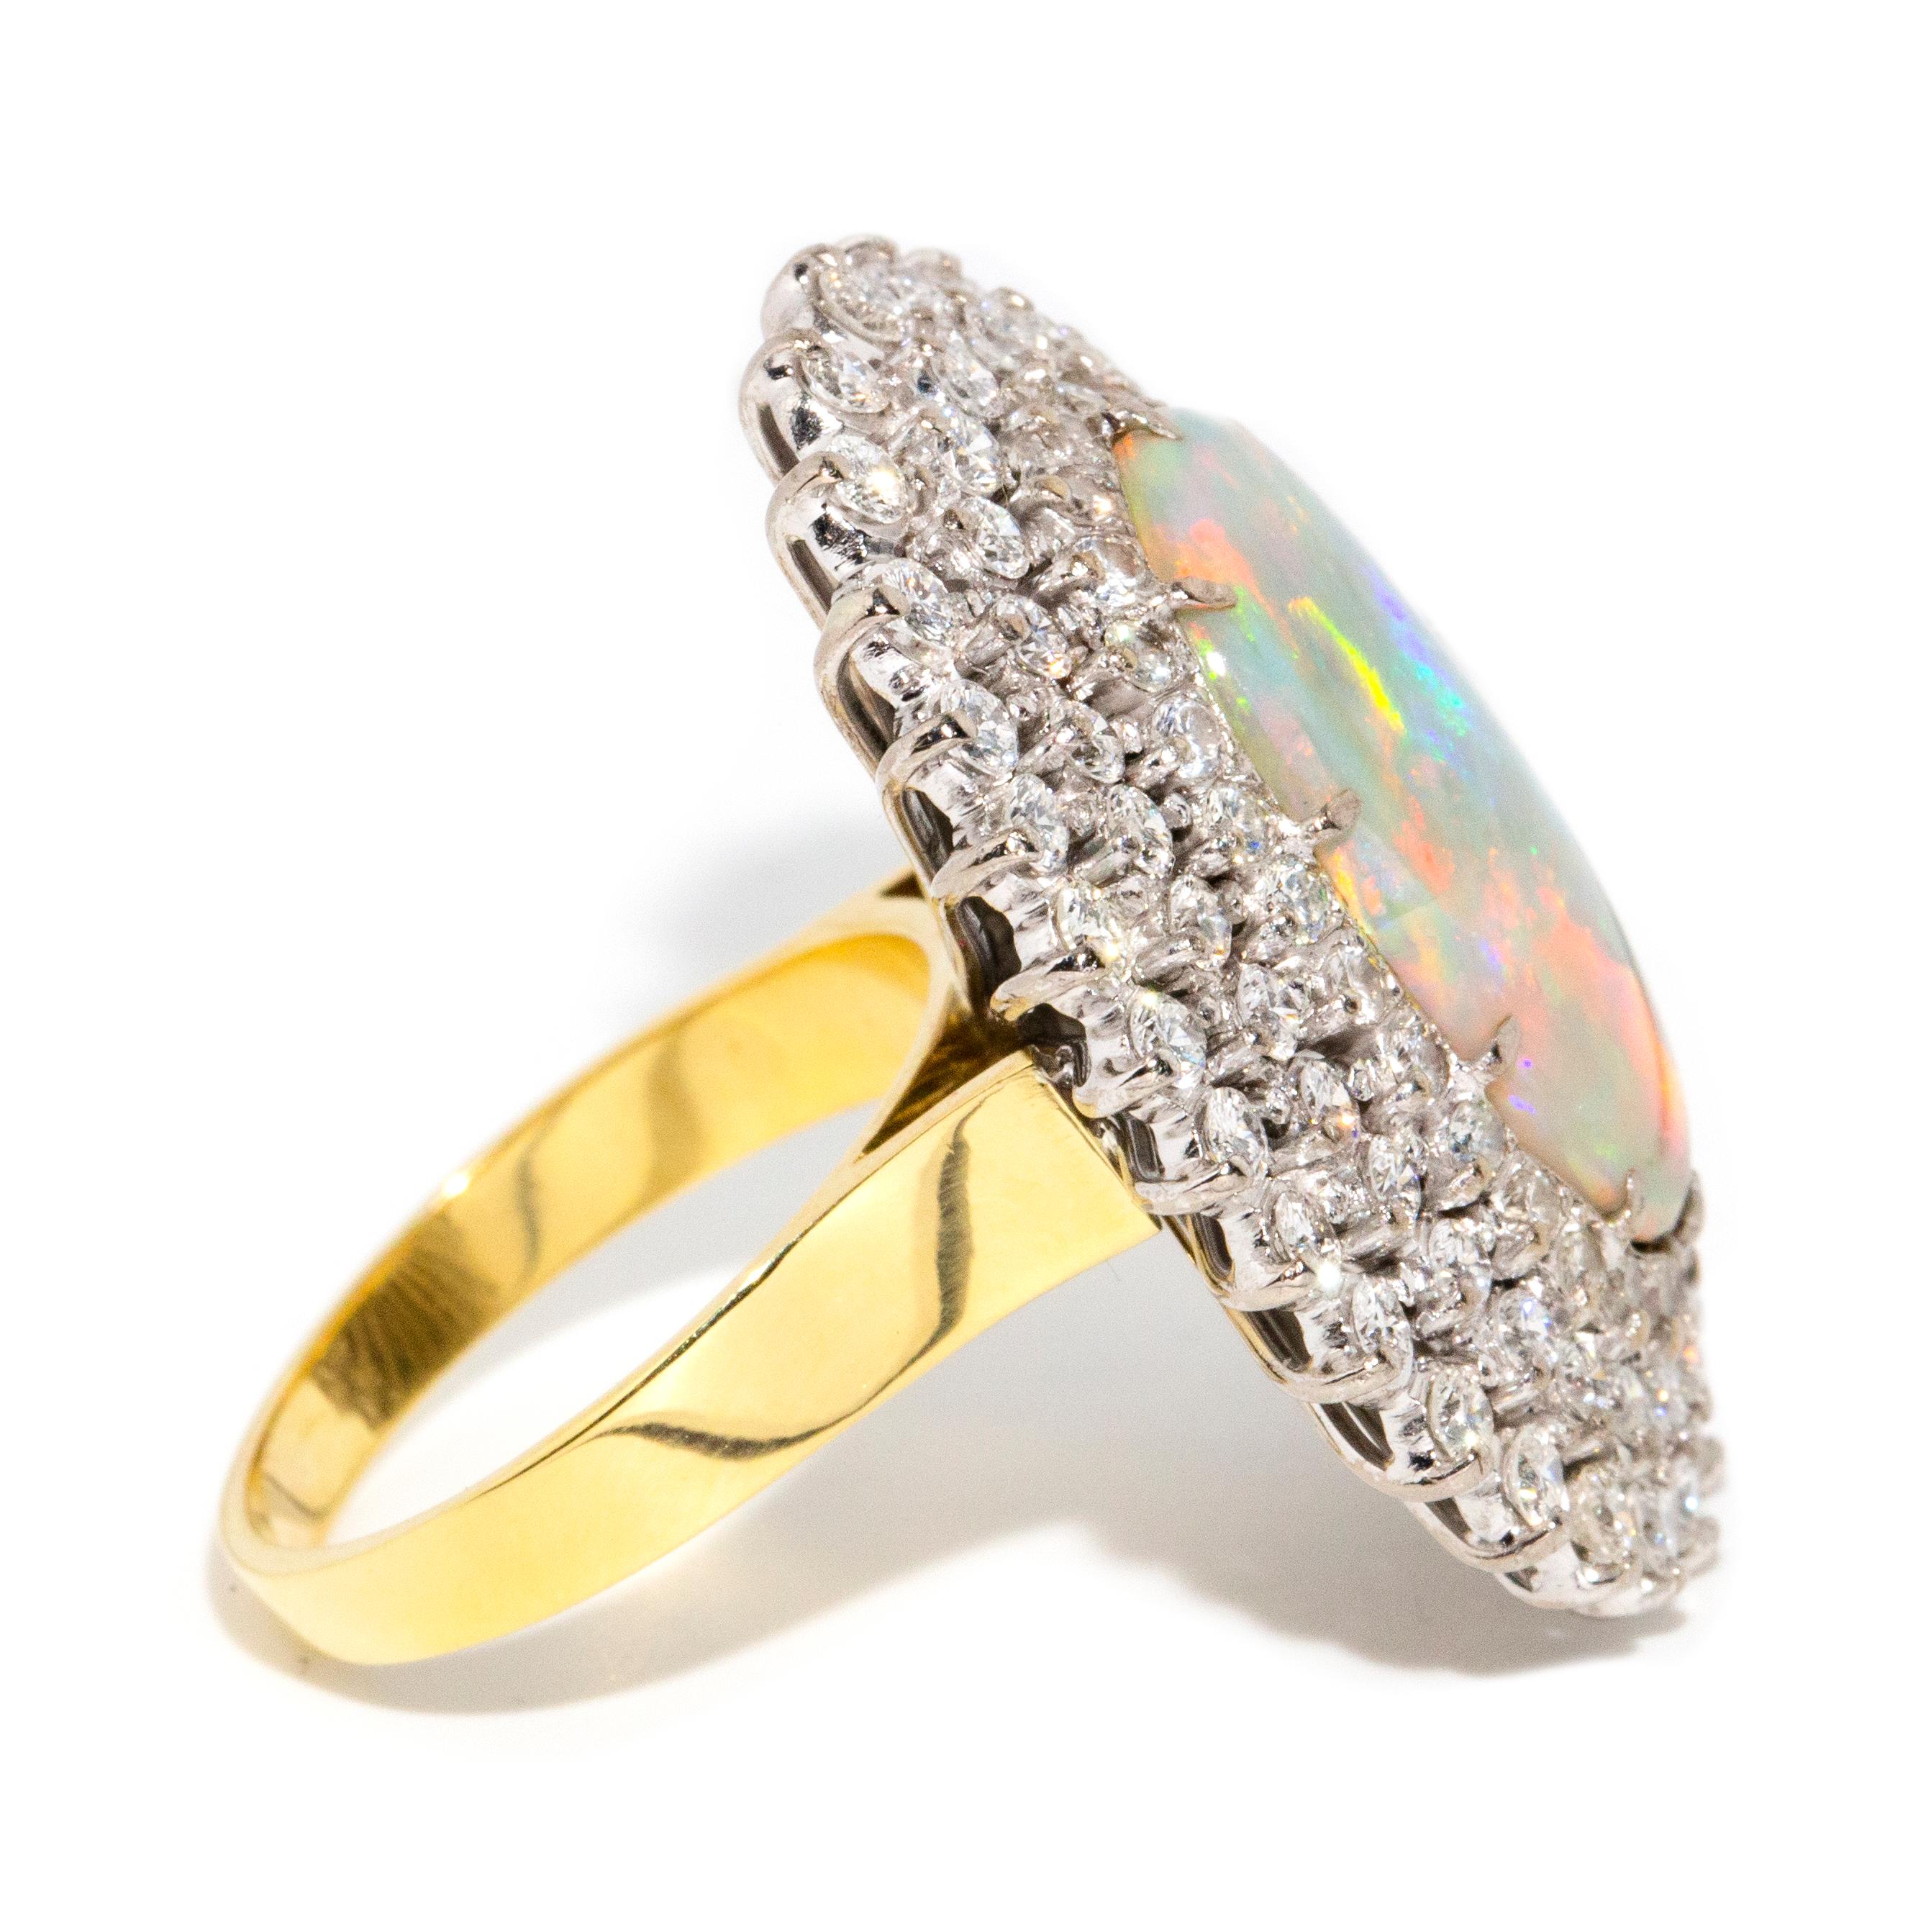 Vintage Circa 1970s Australian Oval Solid Opal & Diamond Halo Ring 18 Carat Gold For Sale 3